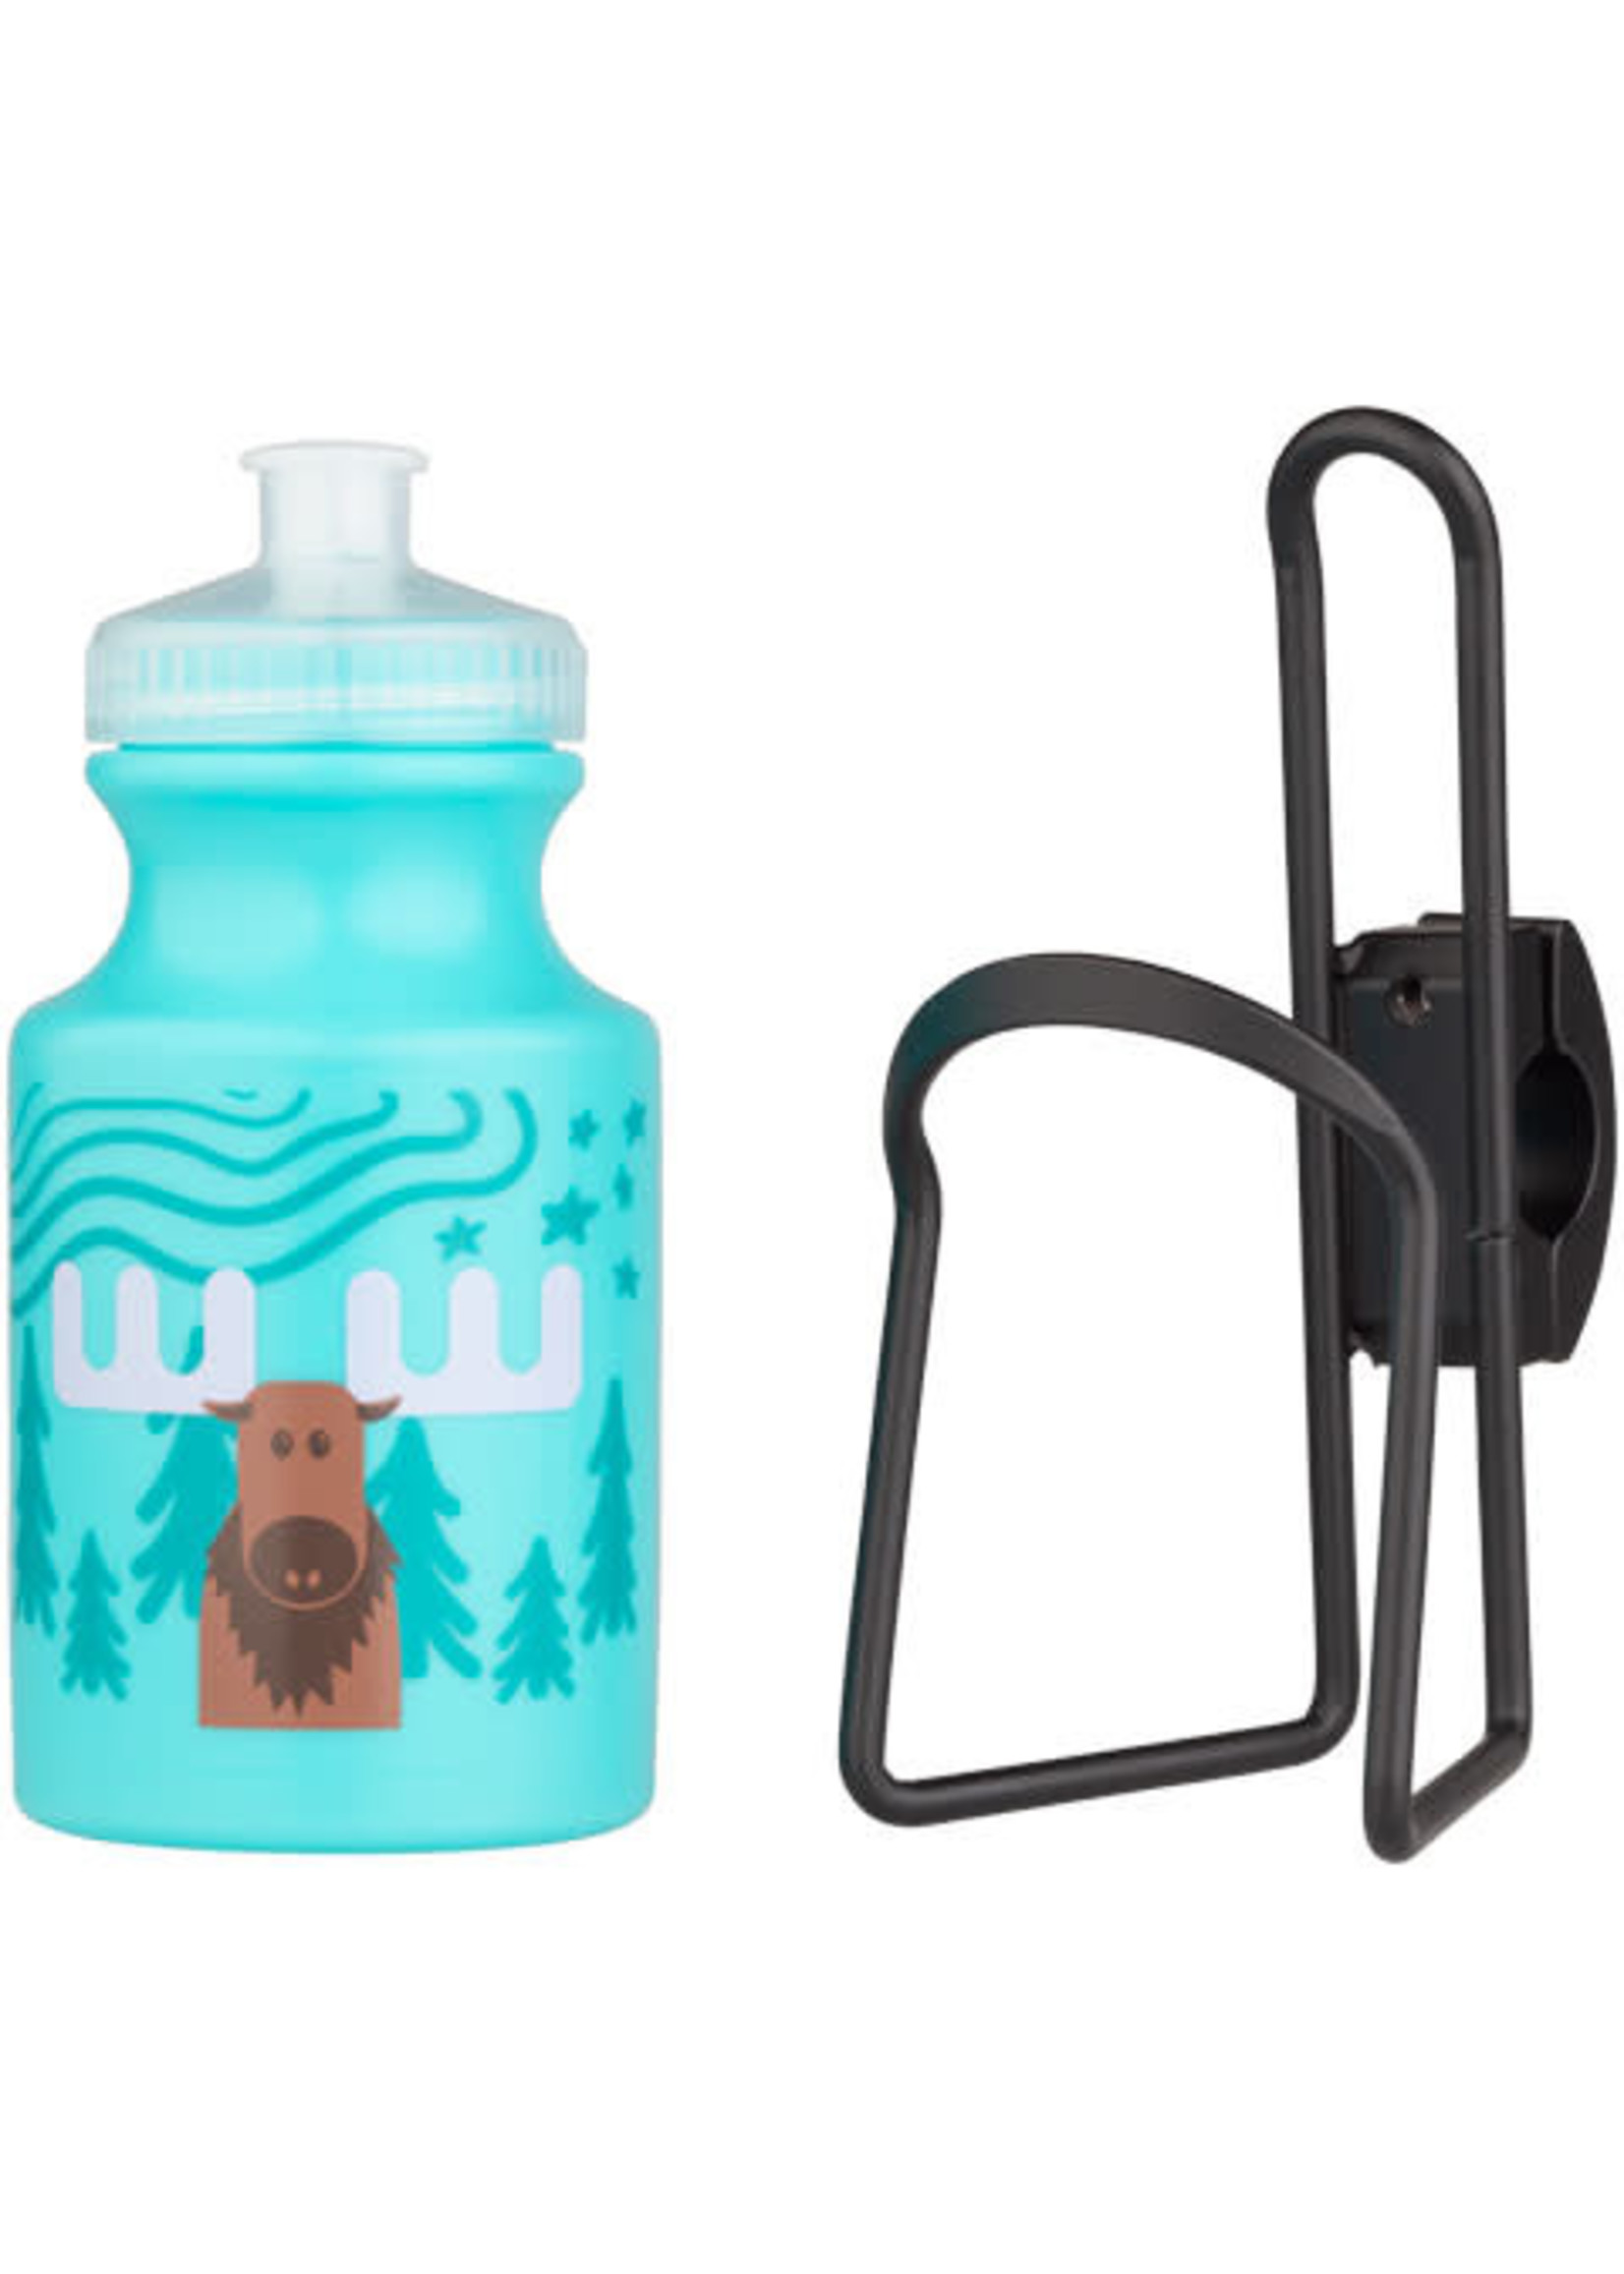 MSW MSW Kids Water Bottle and Cage Kit - Moose w/ Black Cage